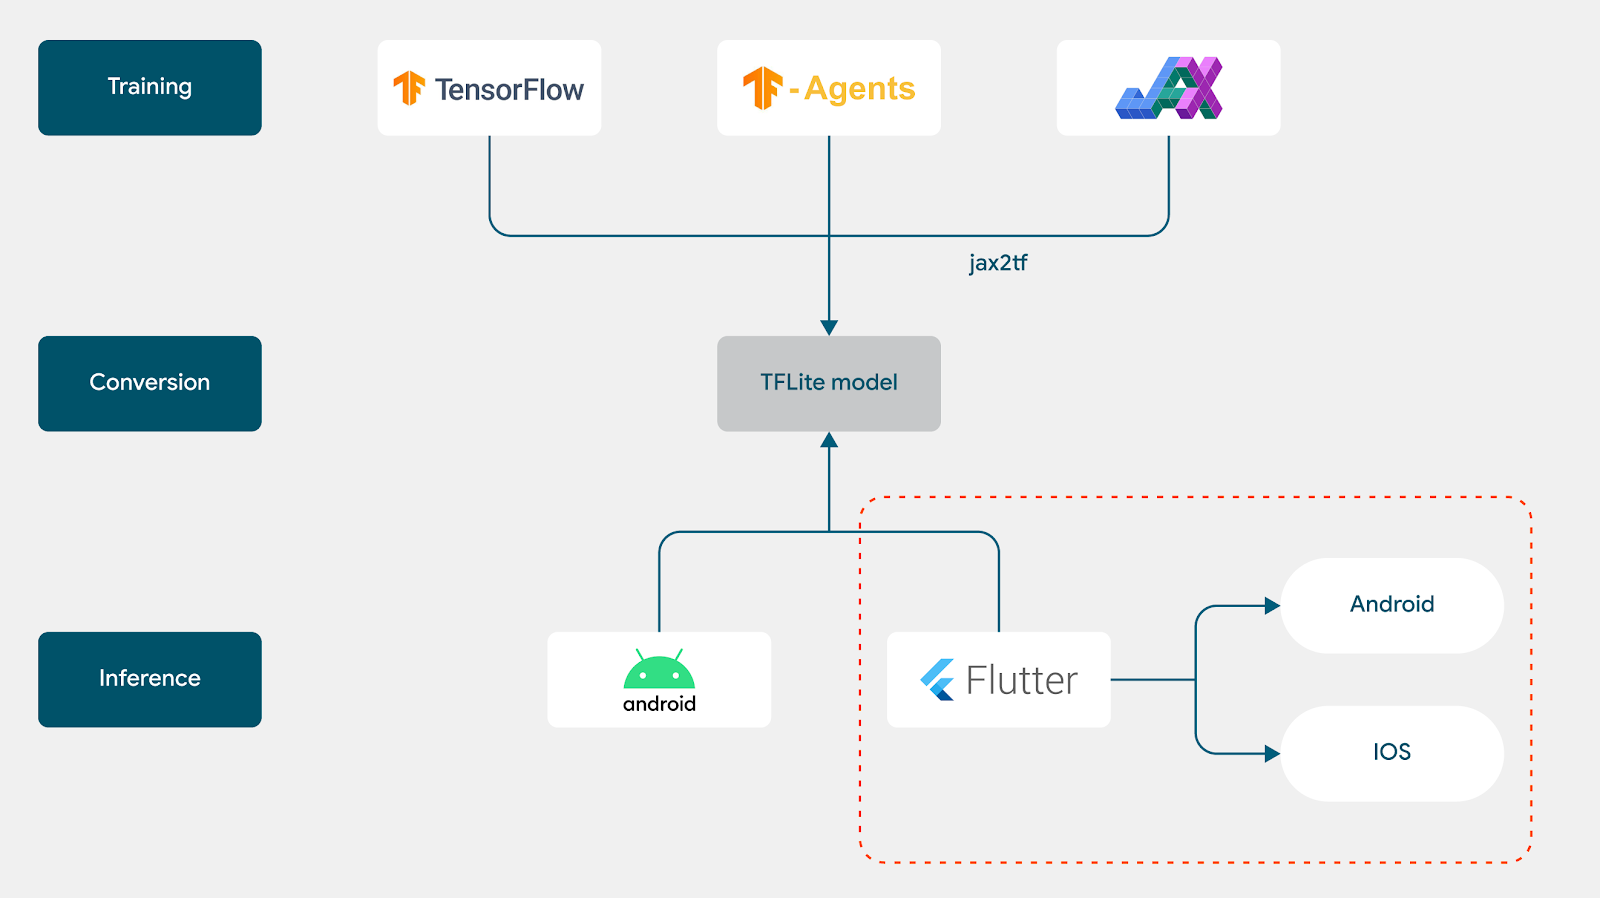 Flow Chart illustrating training a Reinforncement Learning (RL) Agent with TensorFlow, TensorFlow Agents and JAX, deploying the converted model in an Android app and Flutter using the TensorFlow Lite plugin